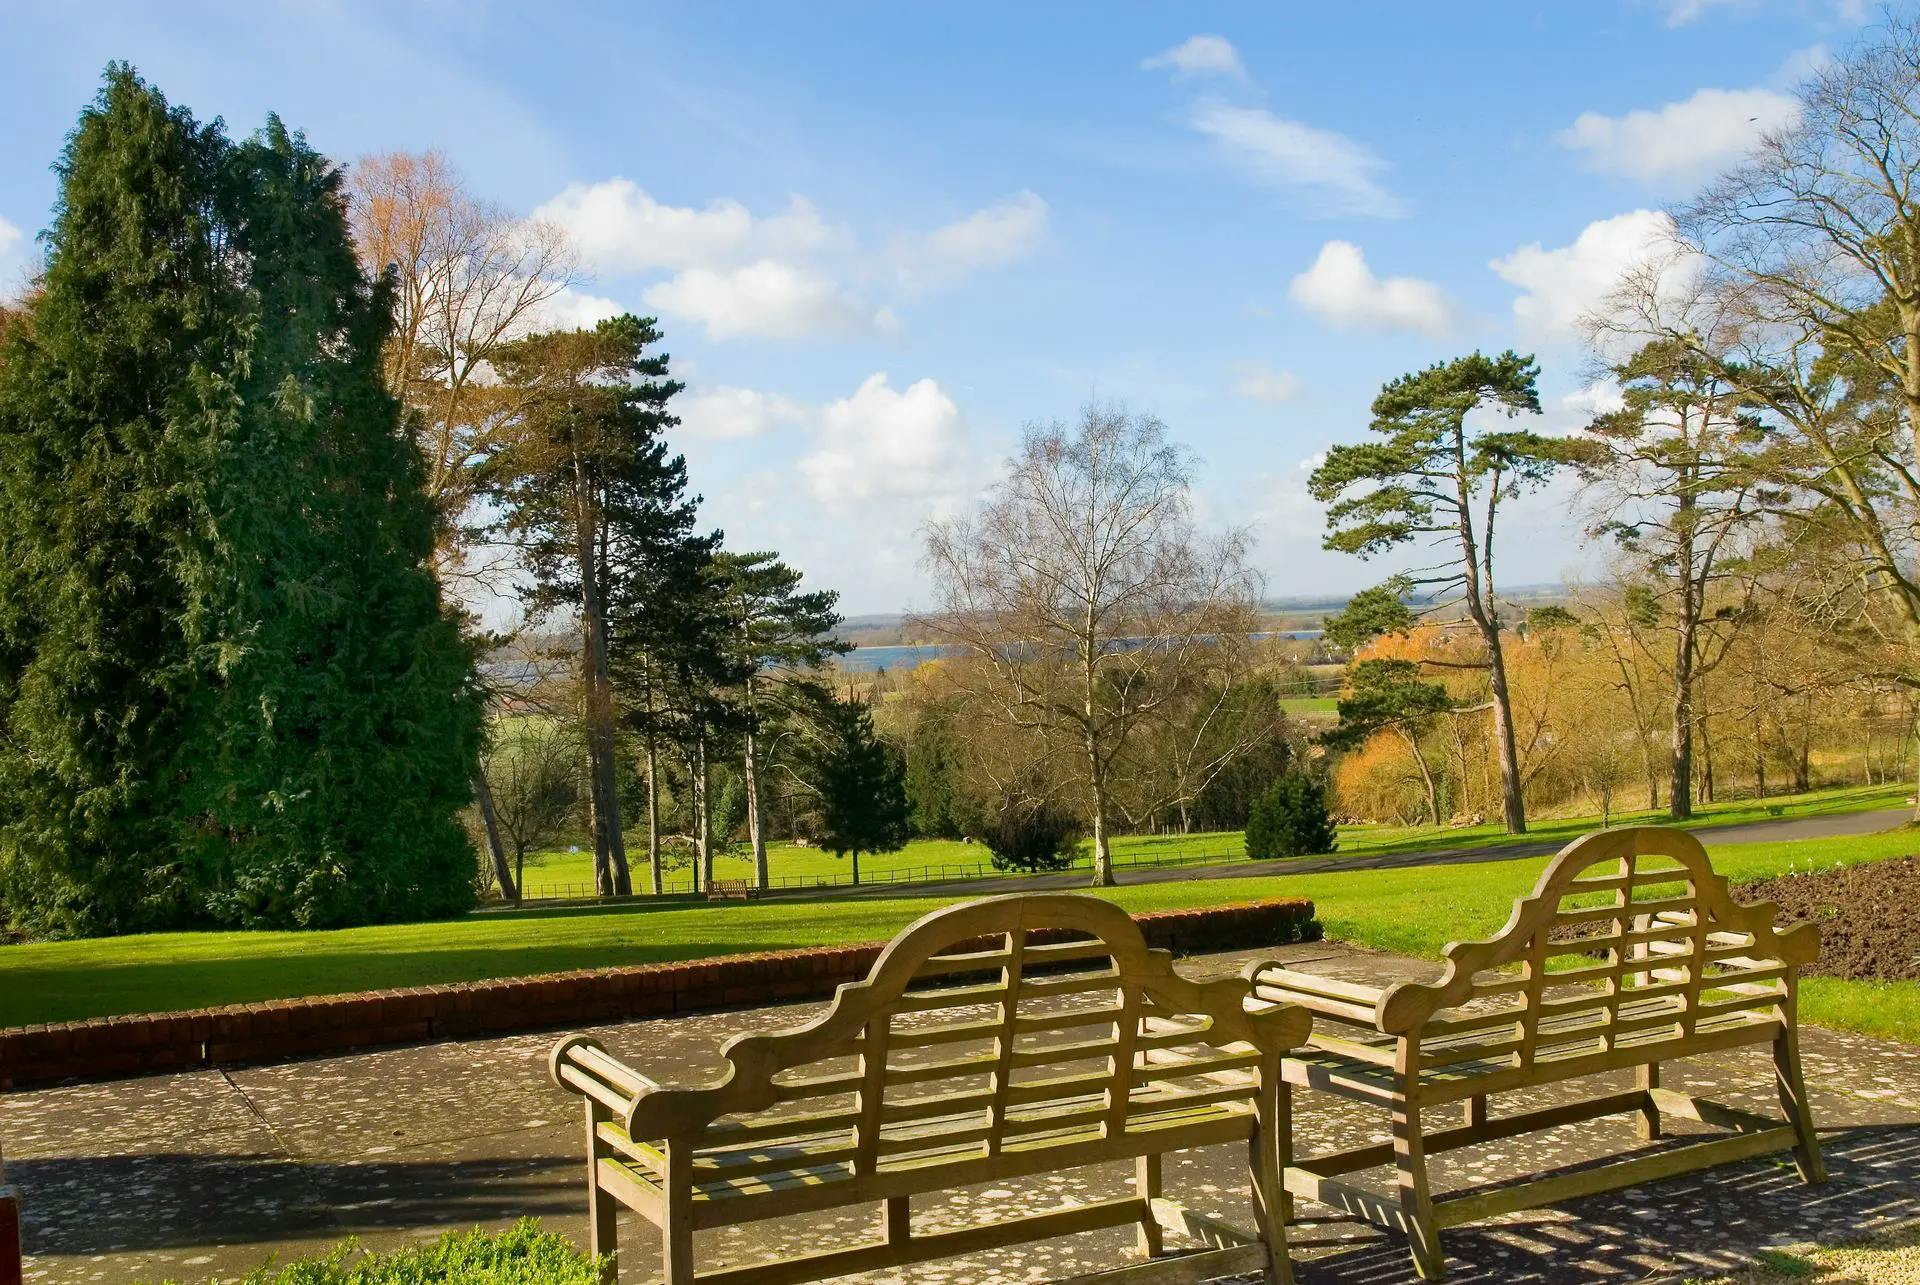 Garden of Oaken Holt care home in Oxford, Oxfordshire